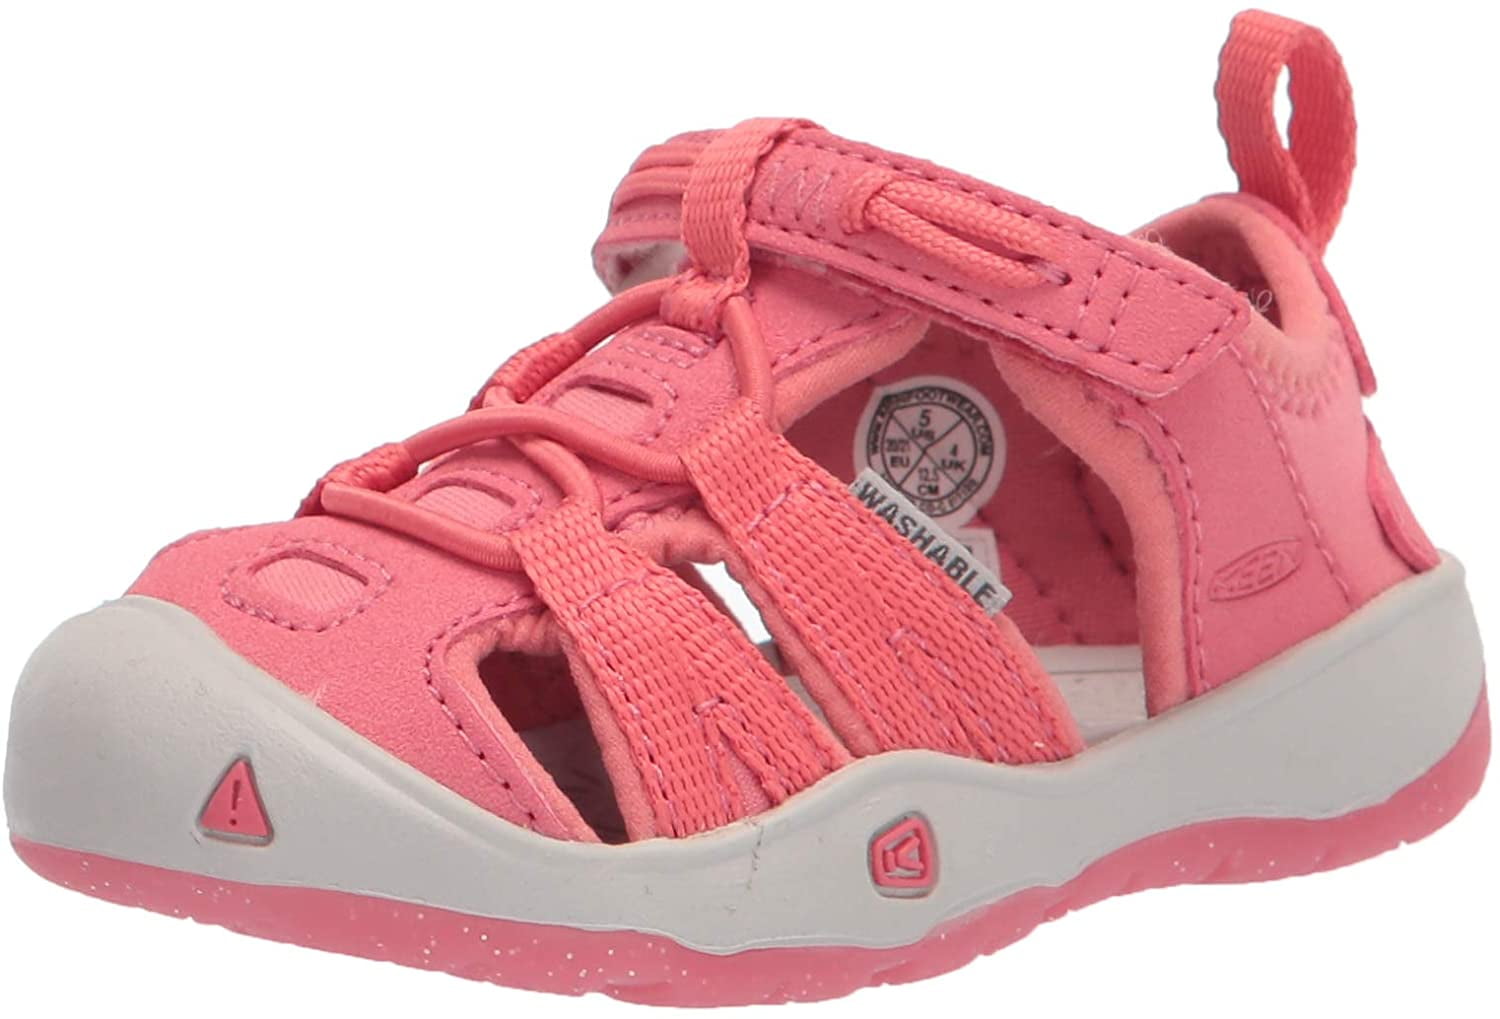 KEEN unisex-child Moxie Closed Toe Casual Sandals 